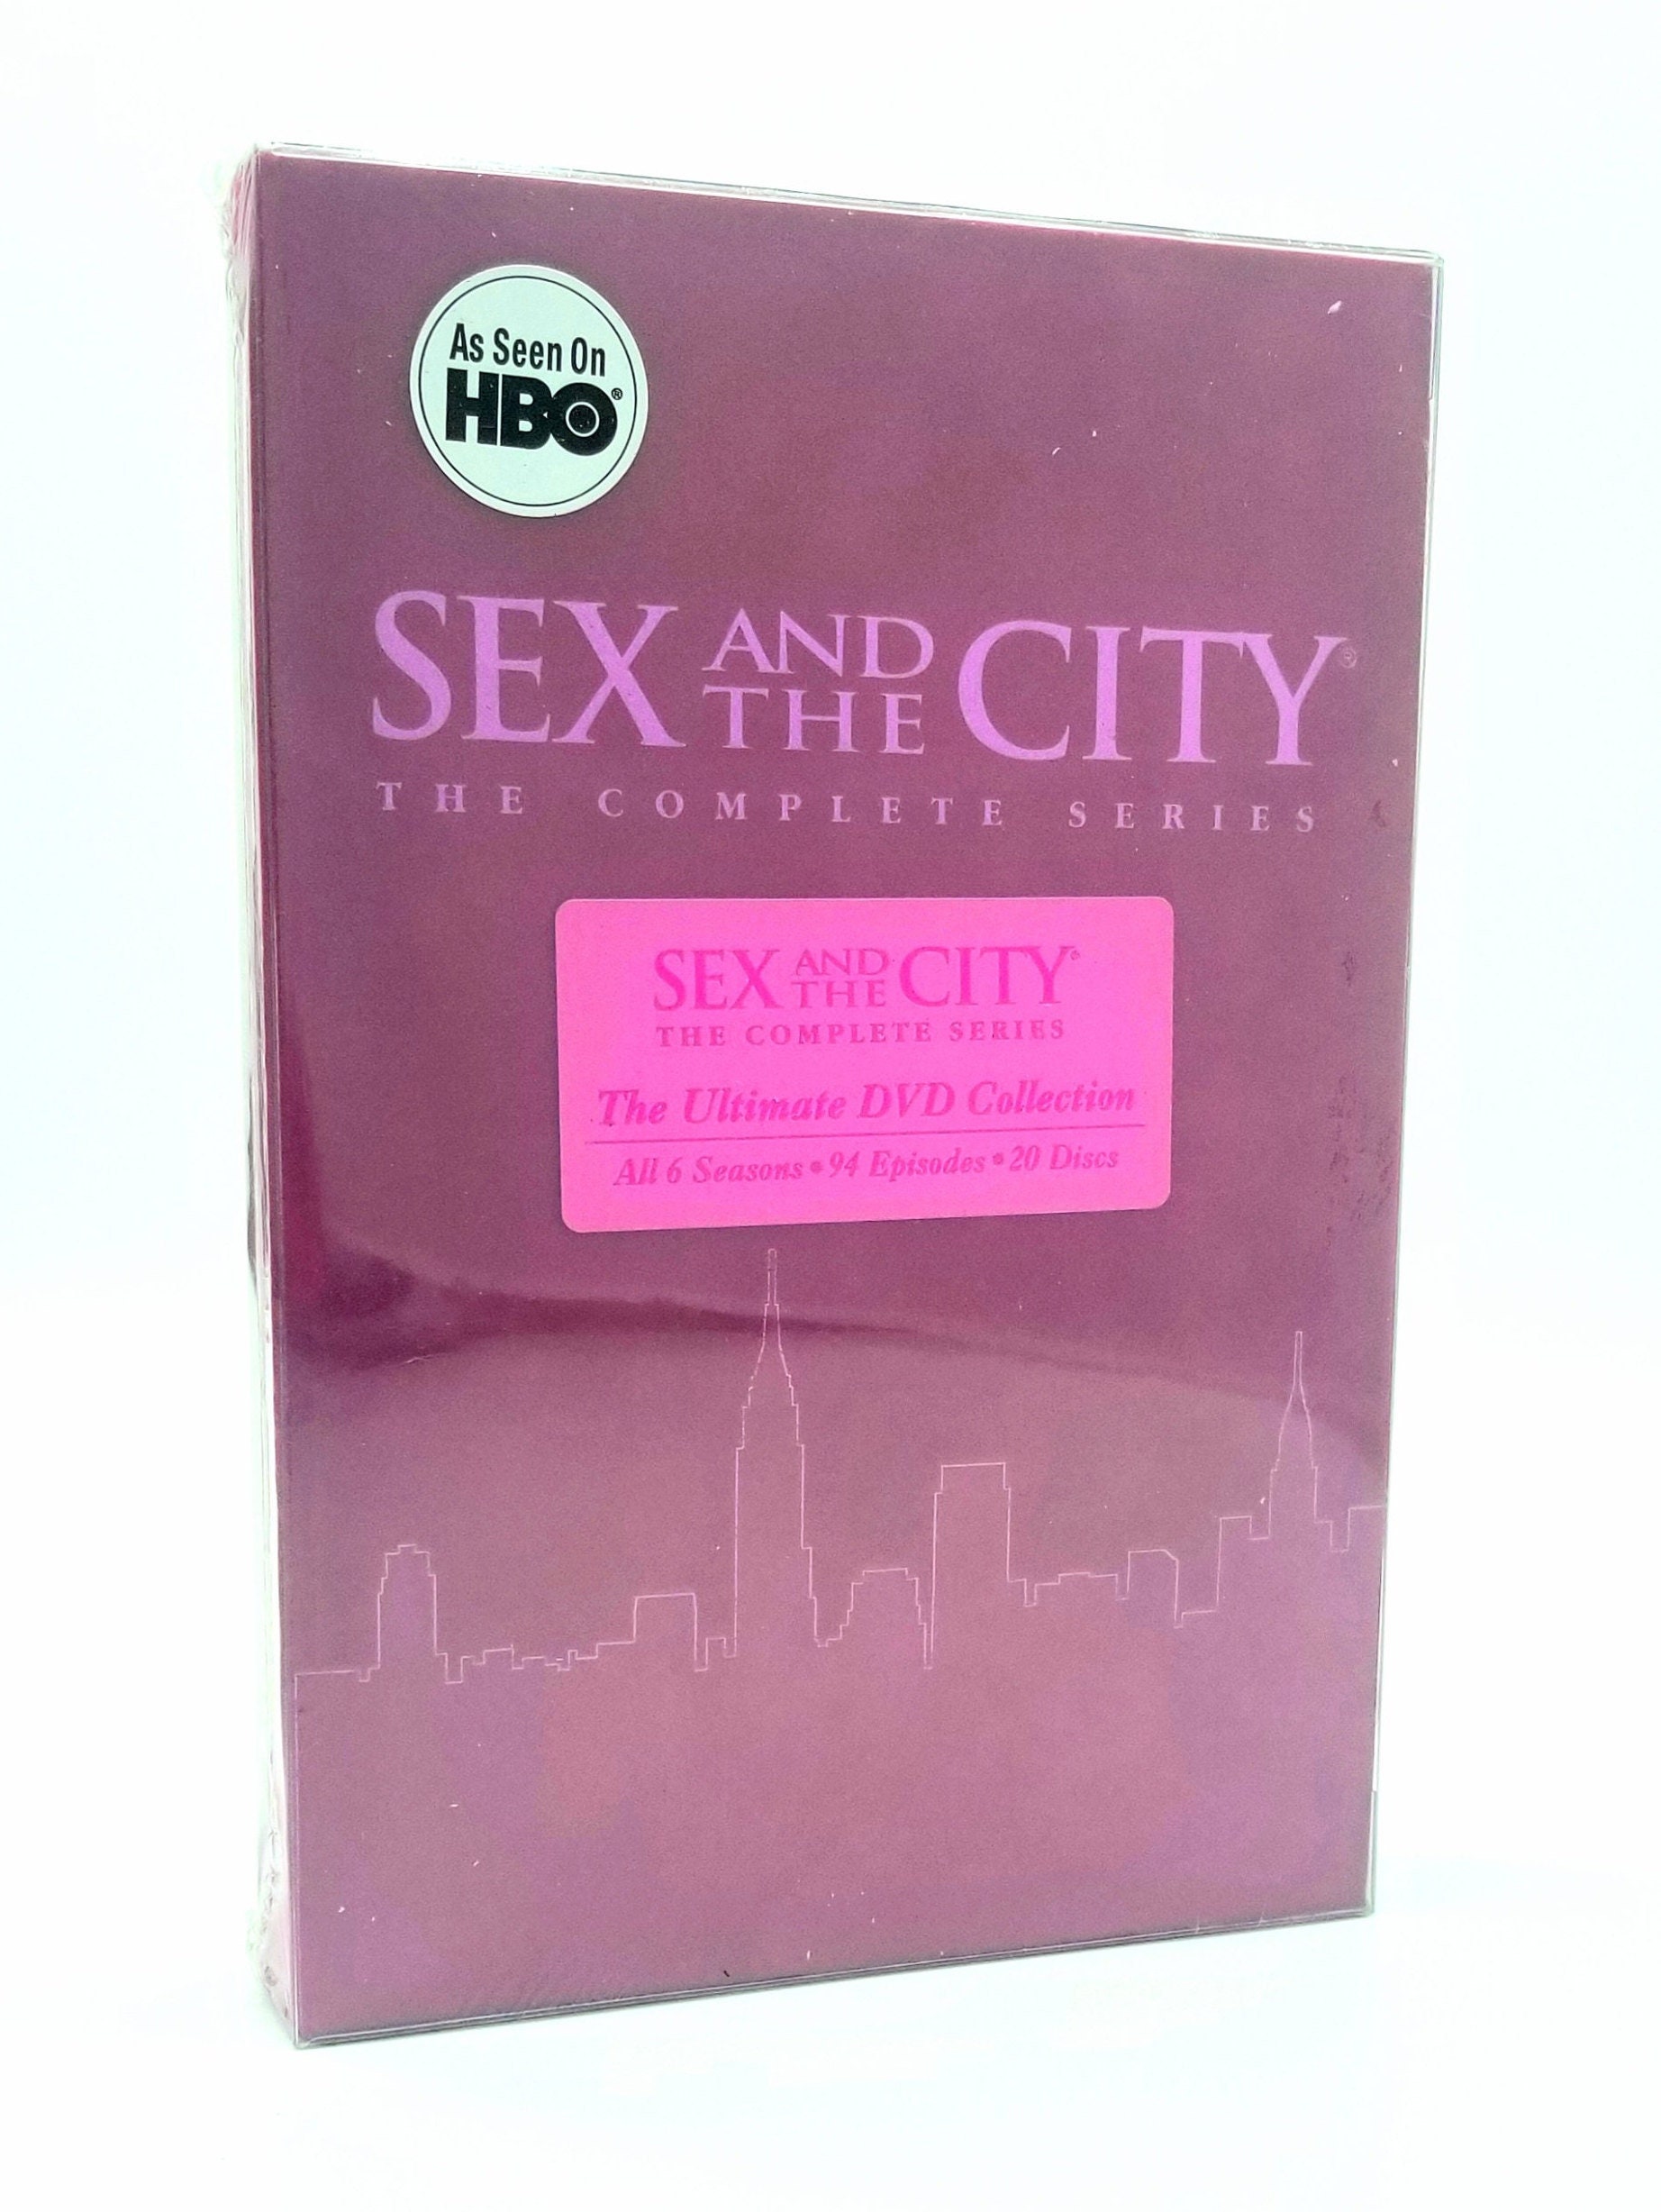 Sex and the City, the Complete Series, DVD Collection as Seen on